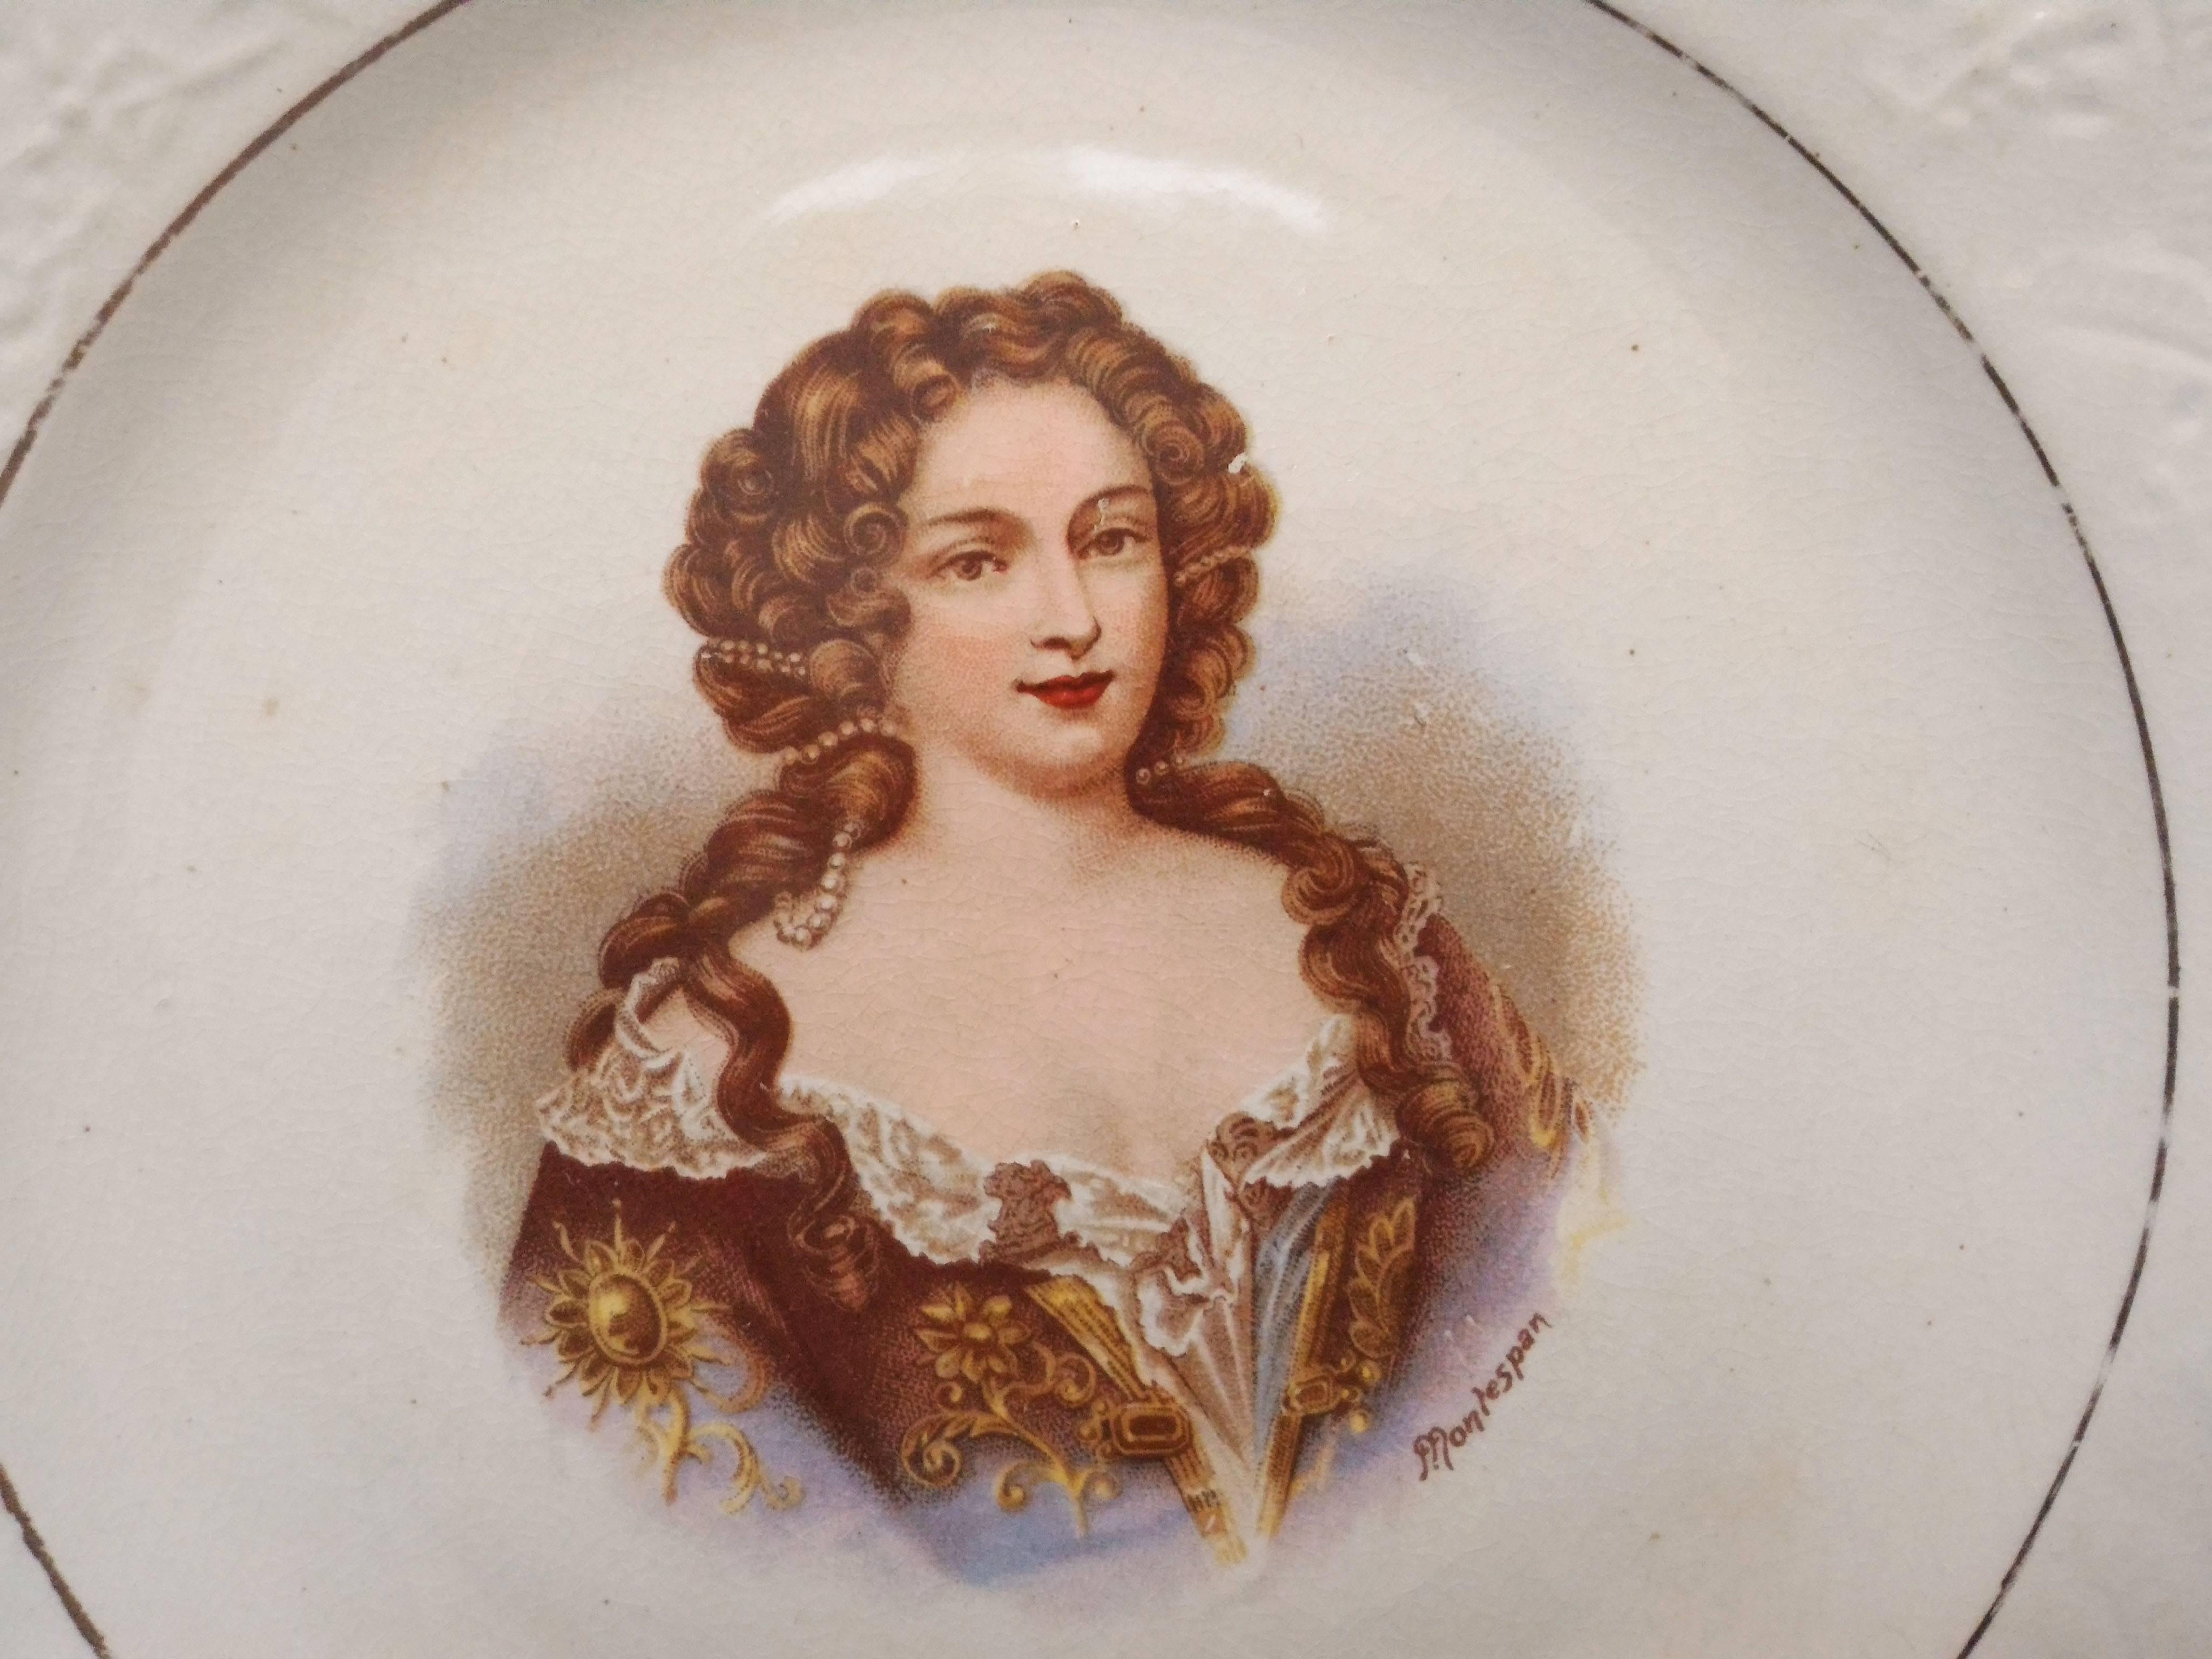 Porcelain Set of Five Decorative French Royal Portraits Plates, Signed by Lebacqz Bouchar